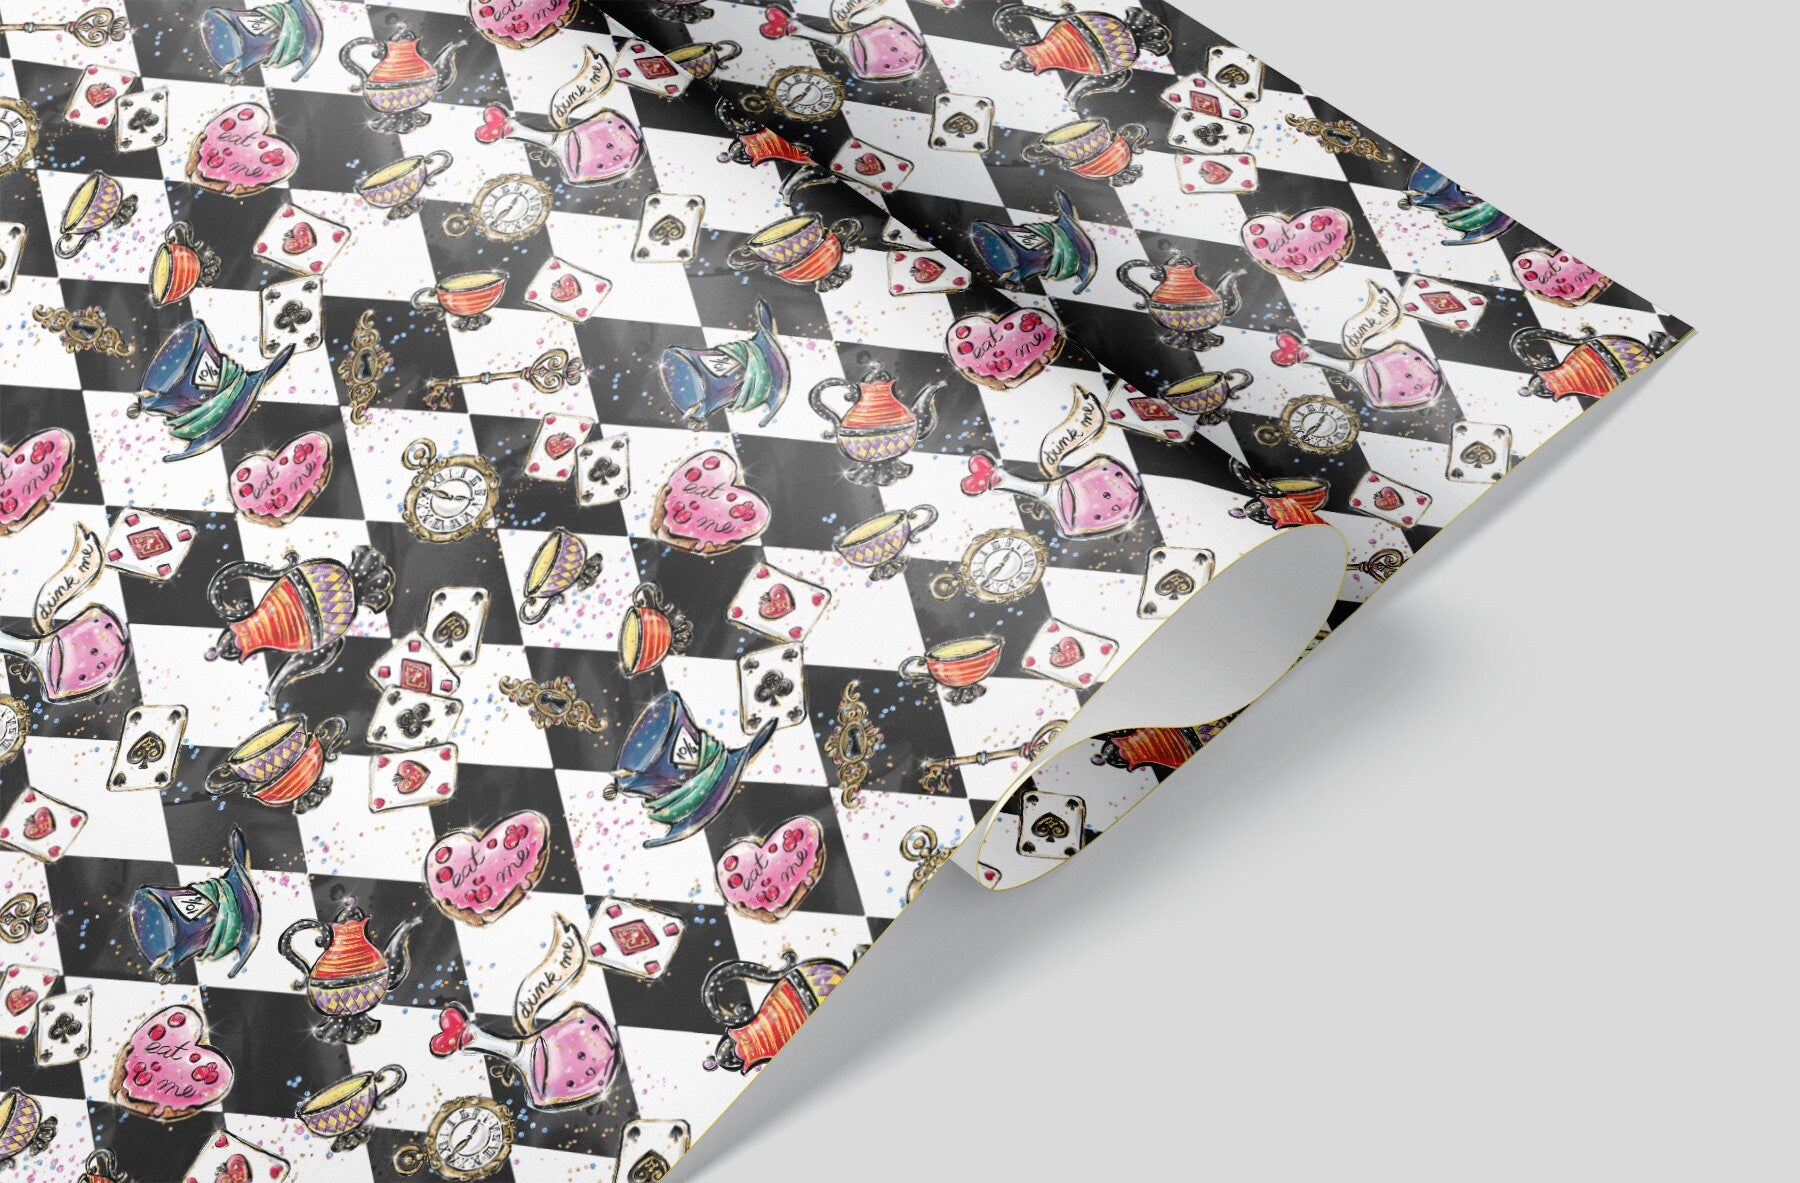 A close up of Black and White Checkerboard wrapping paper with Alice and Wonderland icons, Such as a &quot;drink me&quot; potion and the Mad Hatter&#39;s Hat